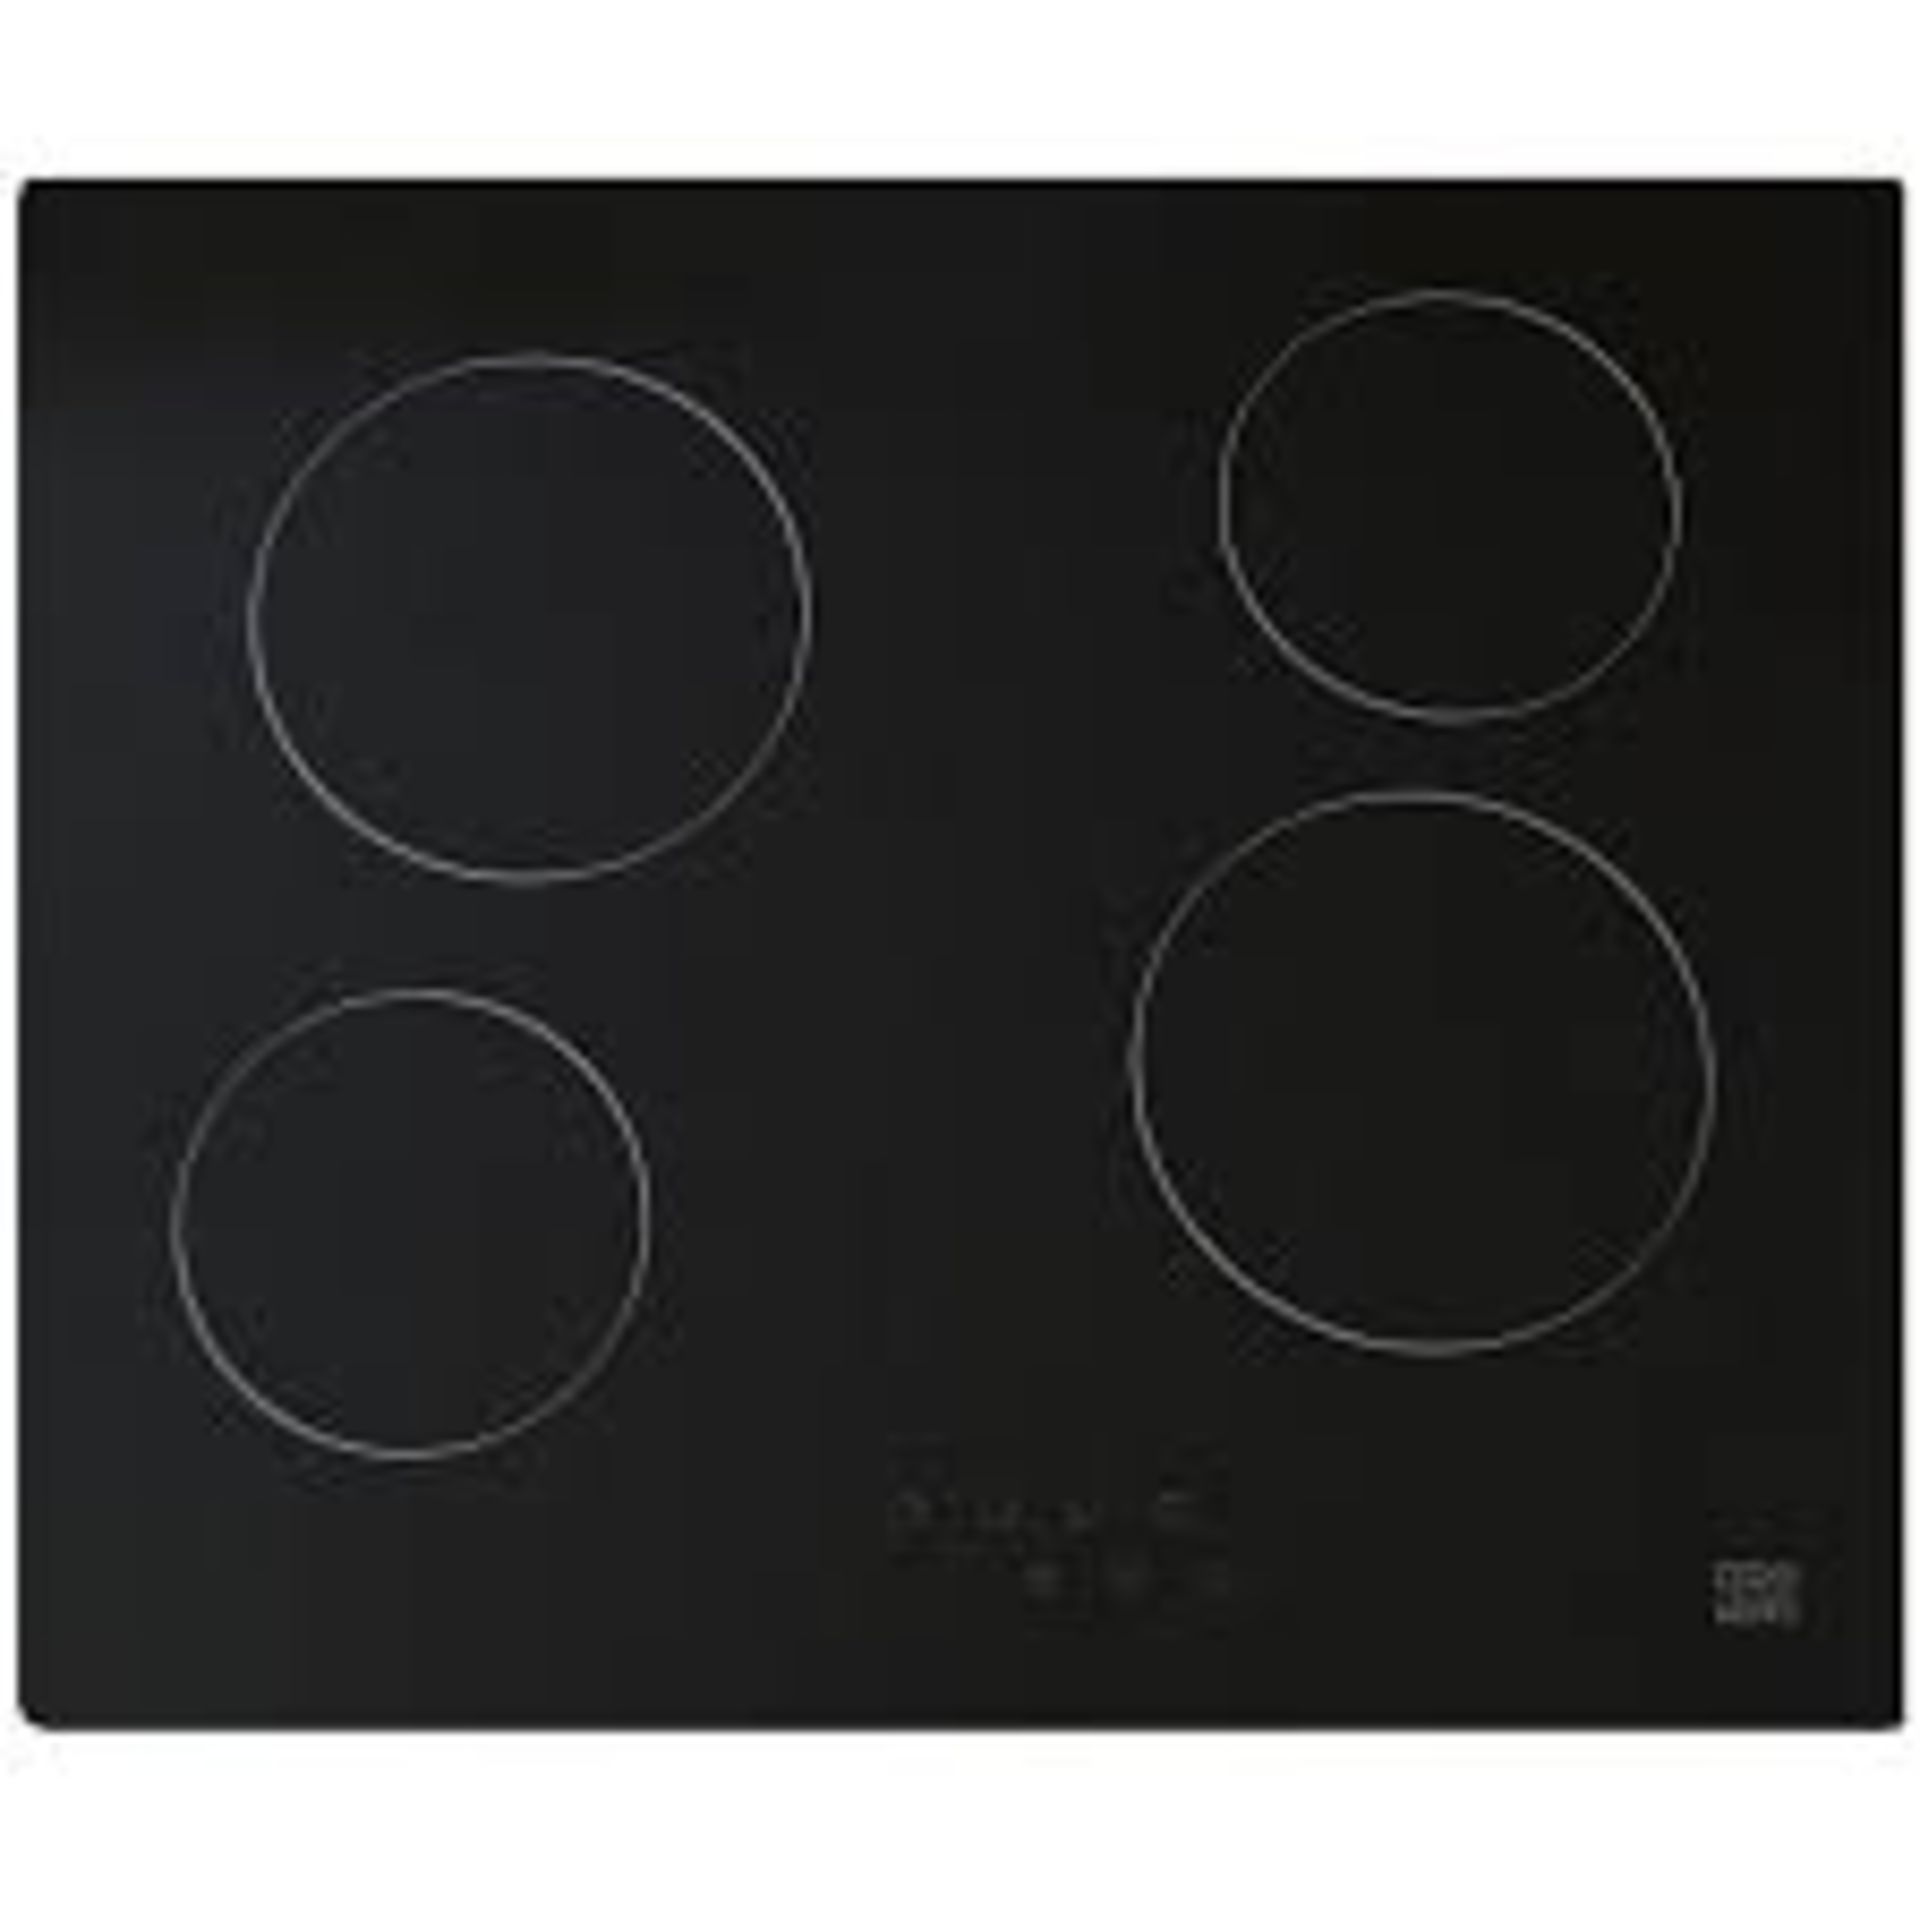 Cooke & Lewis CLCER60A 59cm Ceramic Hob - Black. - R9BW. This 4 zone, touch operated ceramic hob